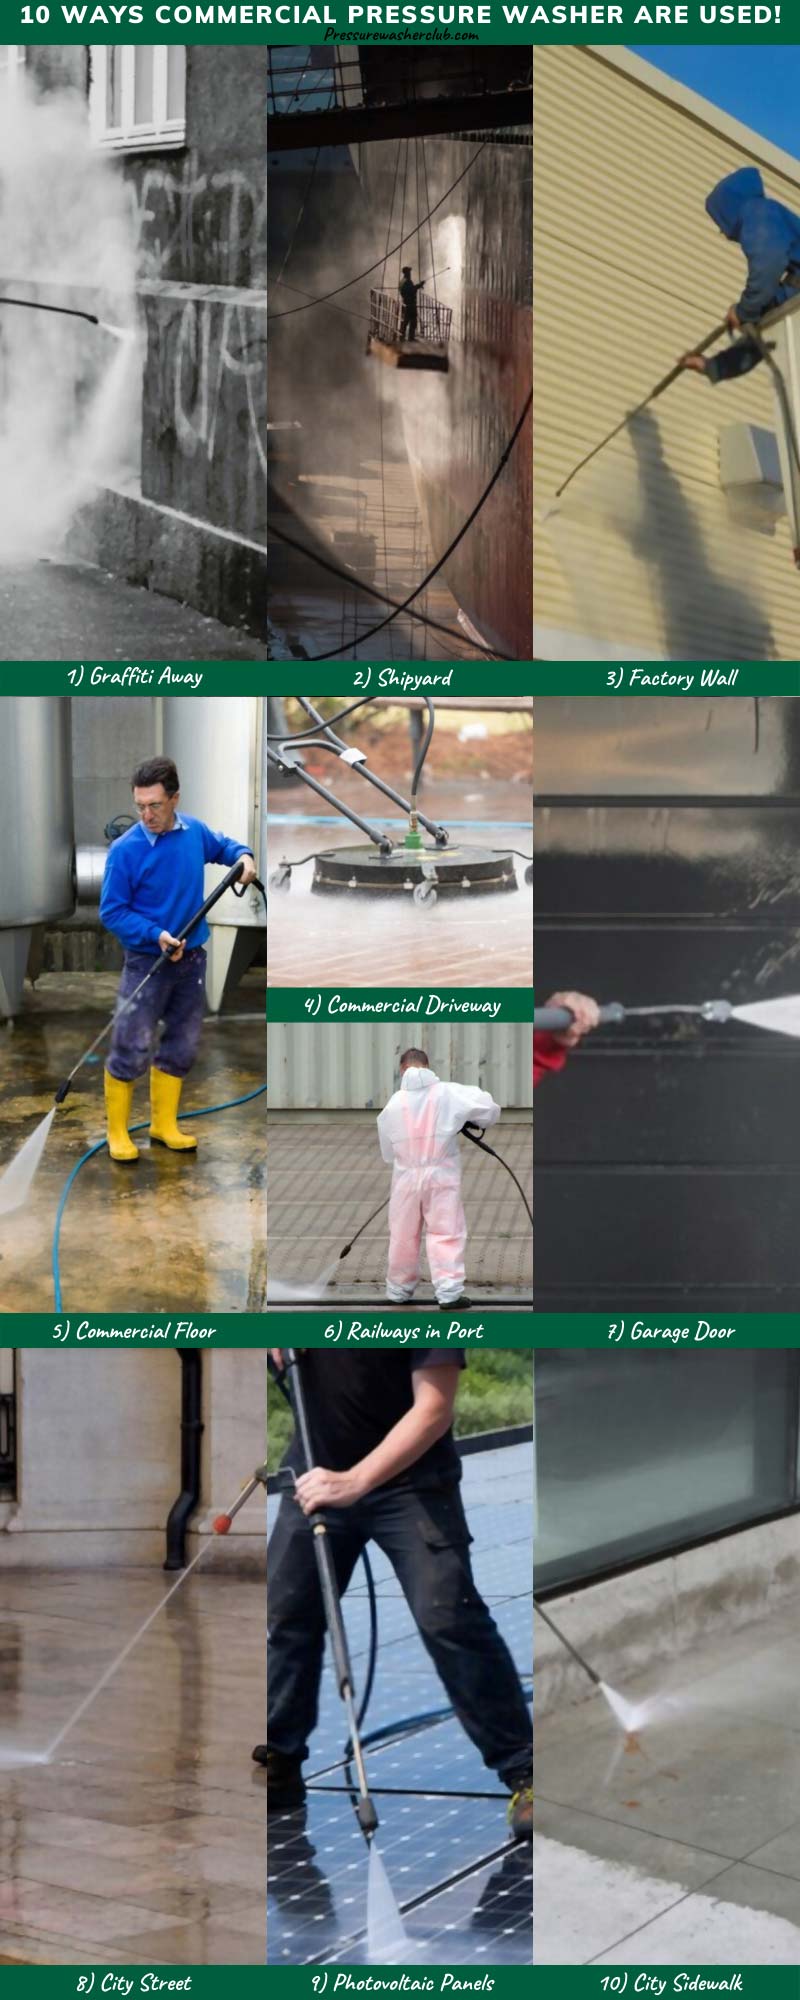 commercial pressure washer used